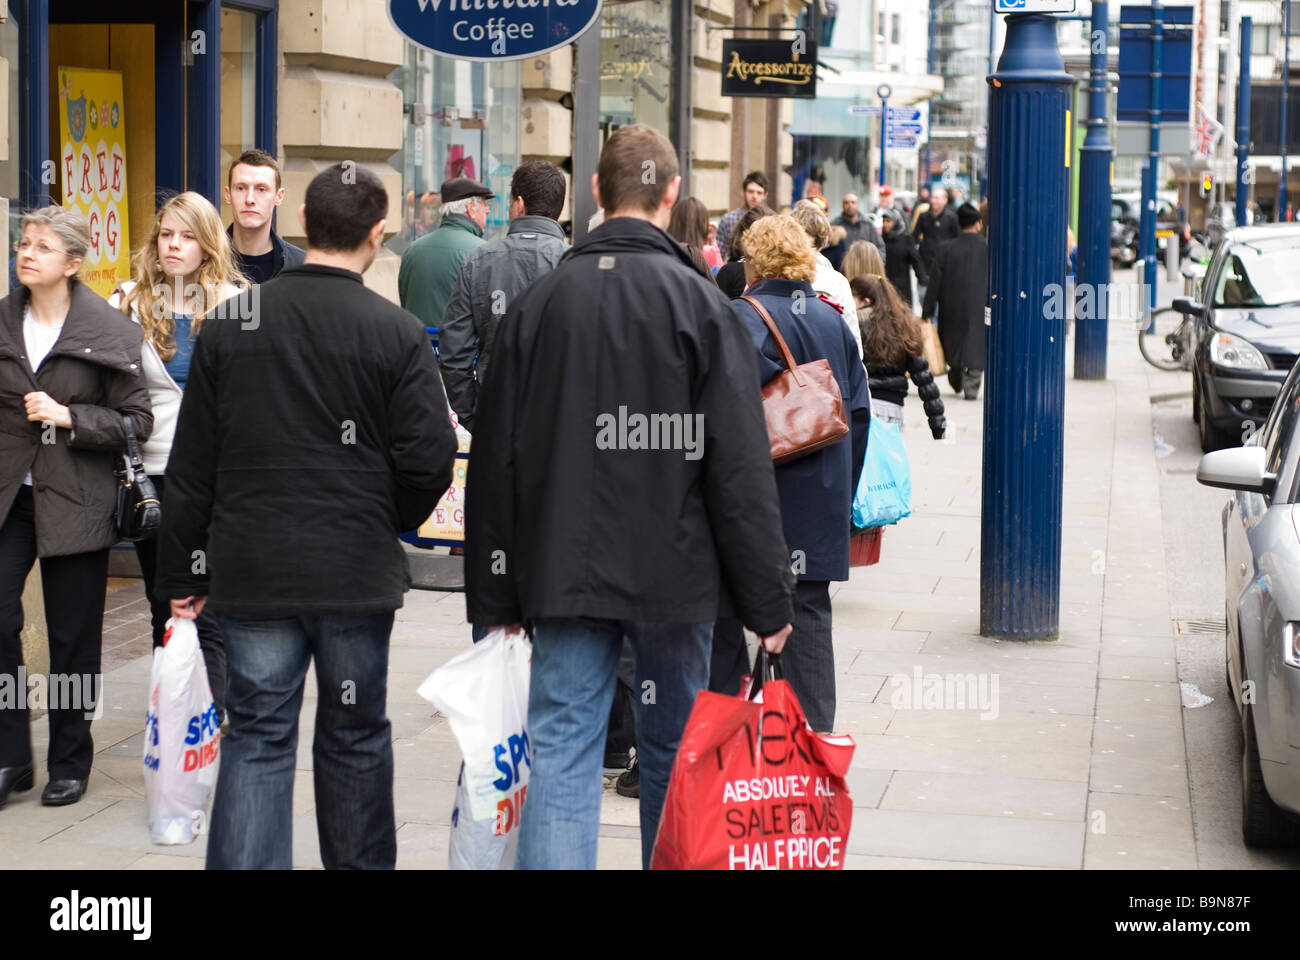 People walking on sidewalk in Manchester city centre UK Stock Photo